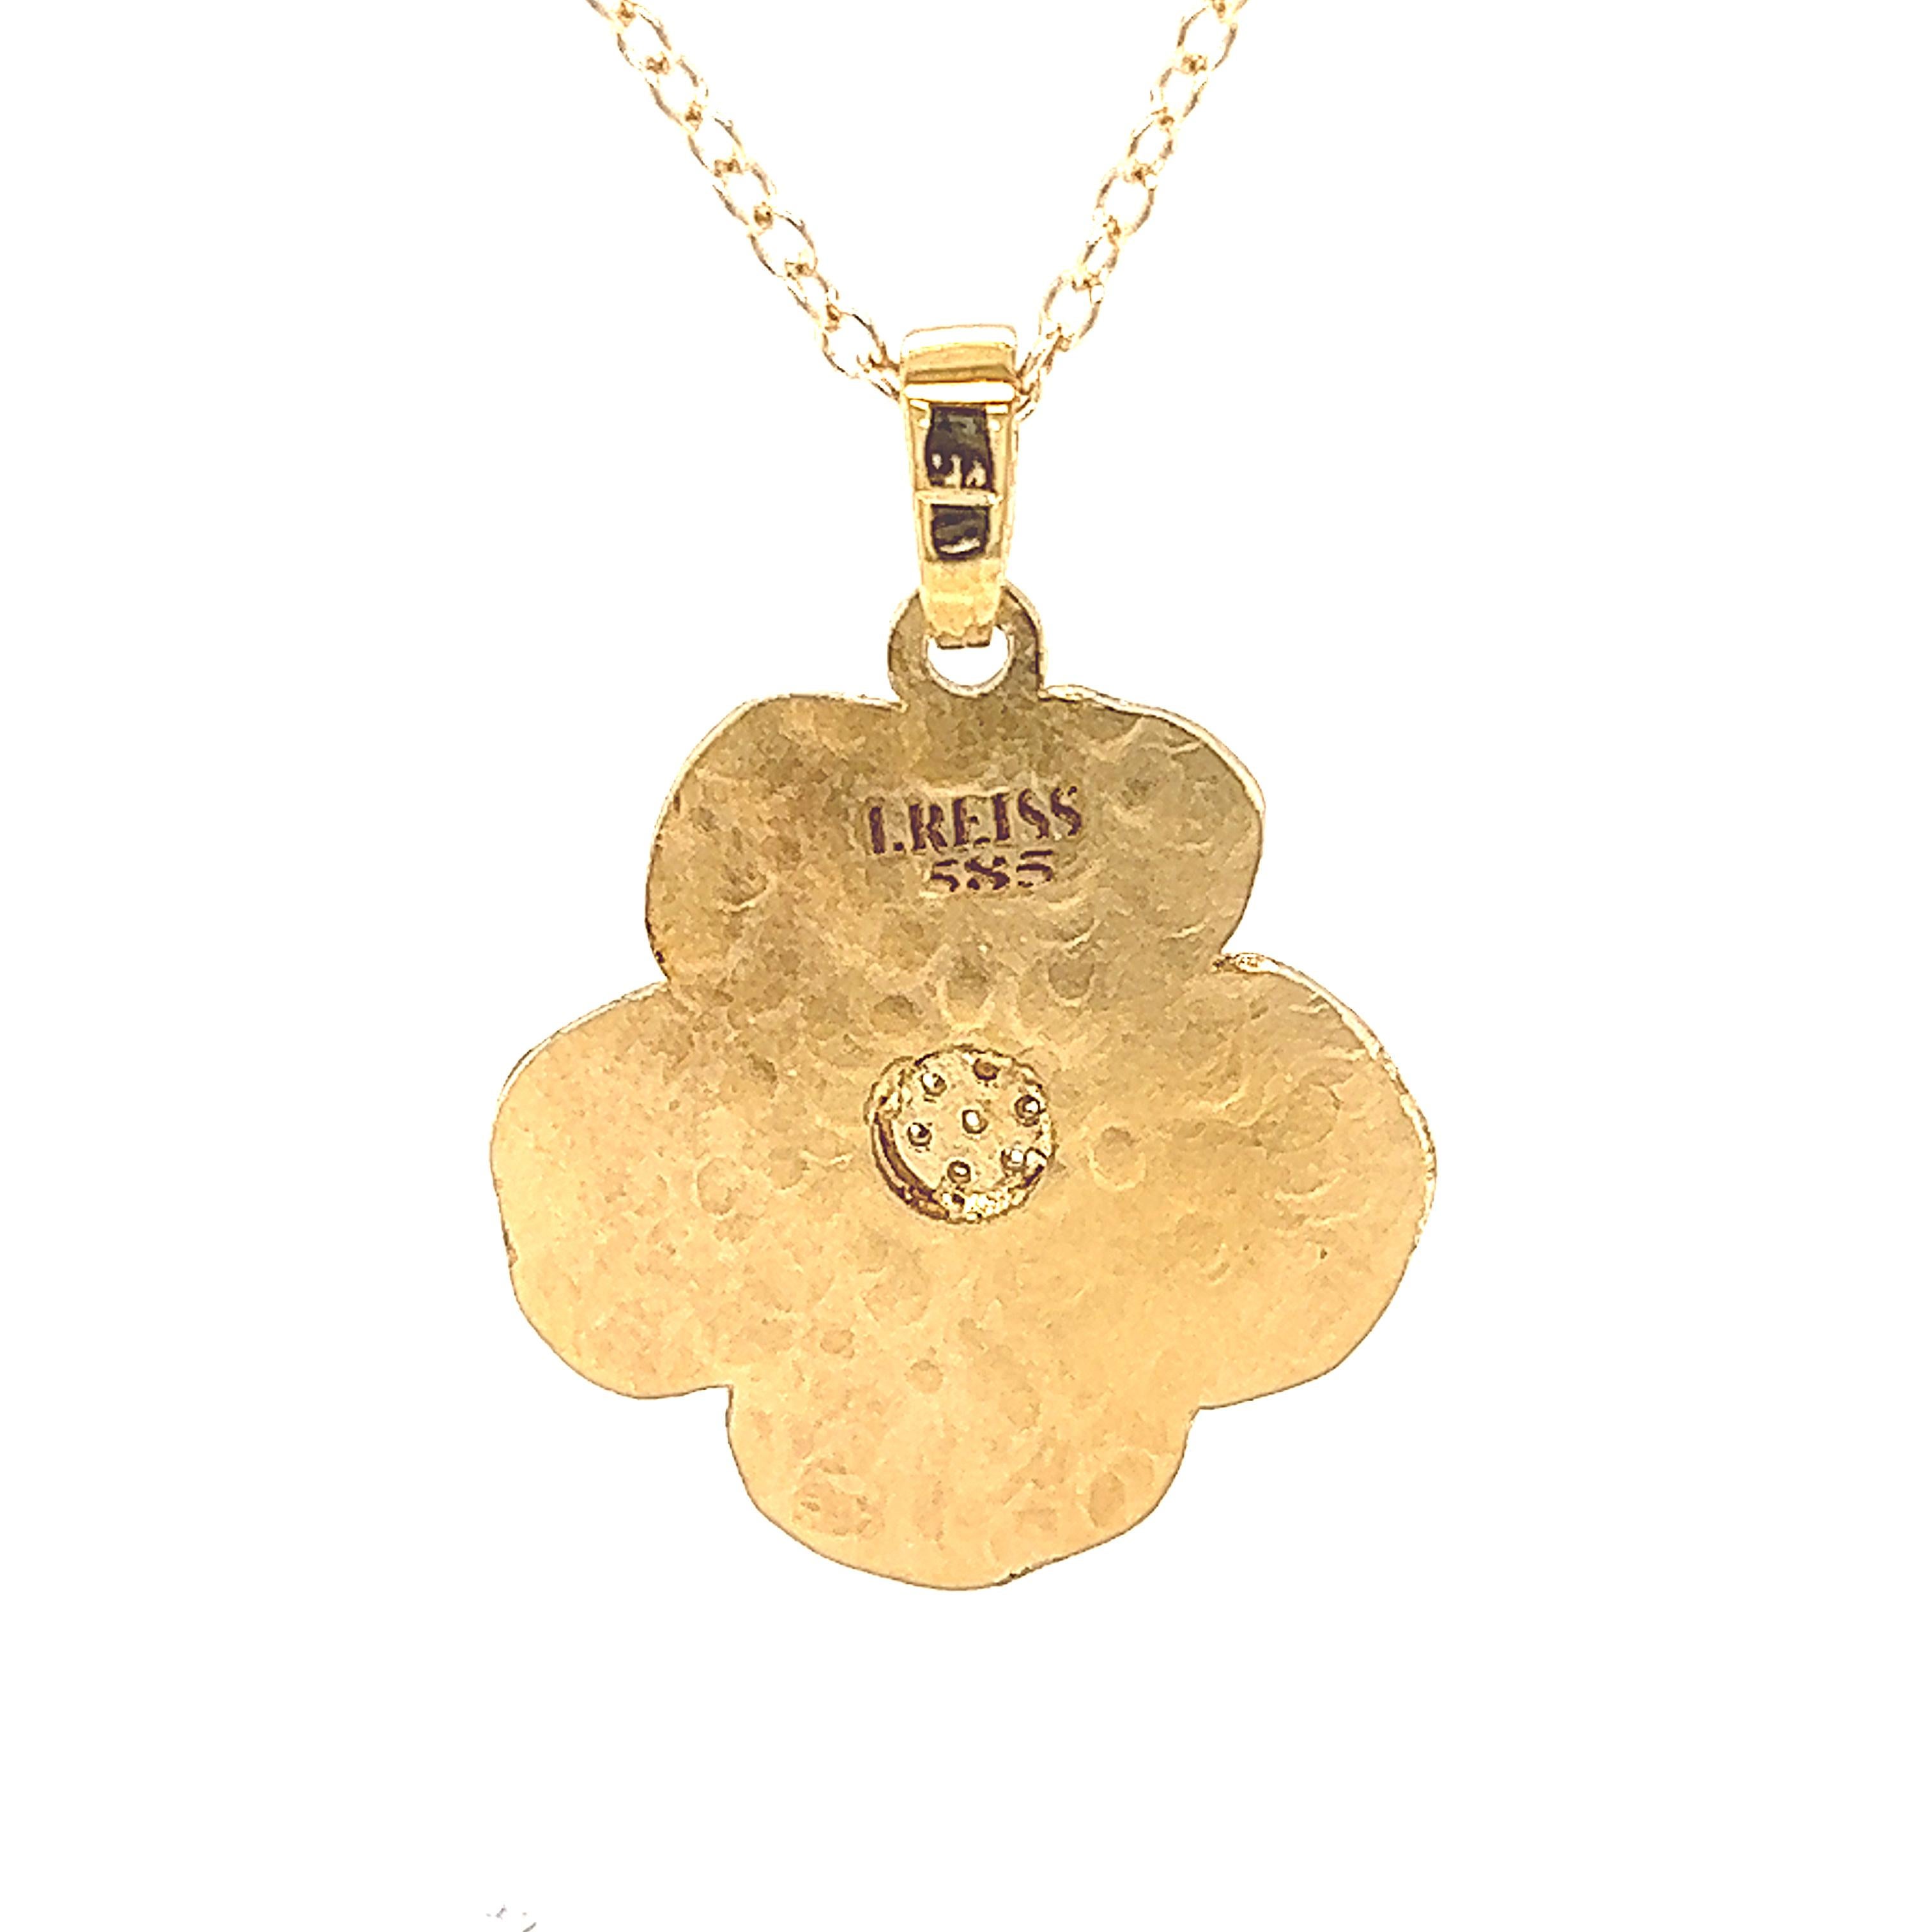 14 Karat Yellow Gold Hand-Crafted Matte and Polish-Finished 22mm Flower Pendant, Accented with 0.08 Carats of Pave Set Diamonds, Sliding on a 16